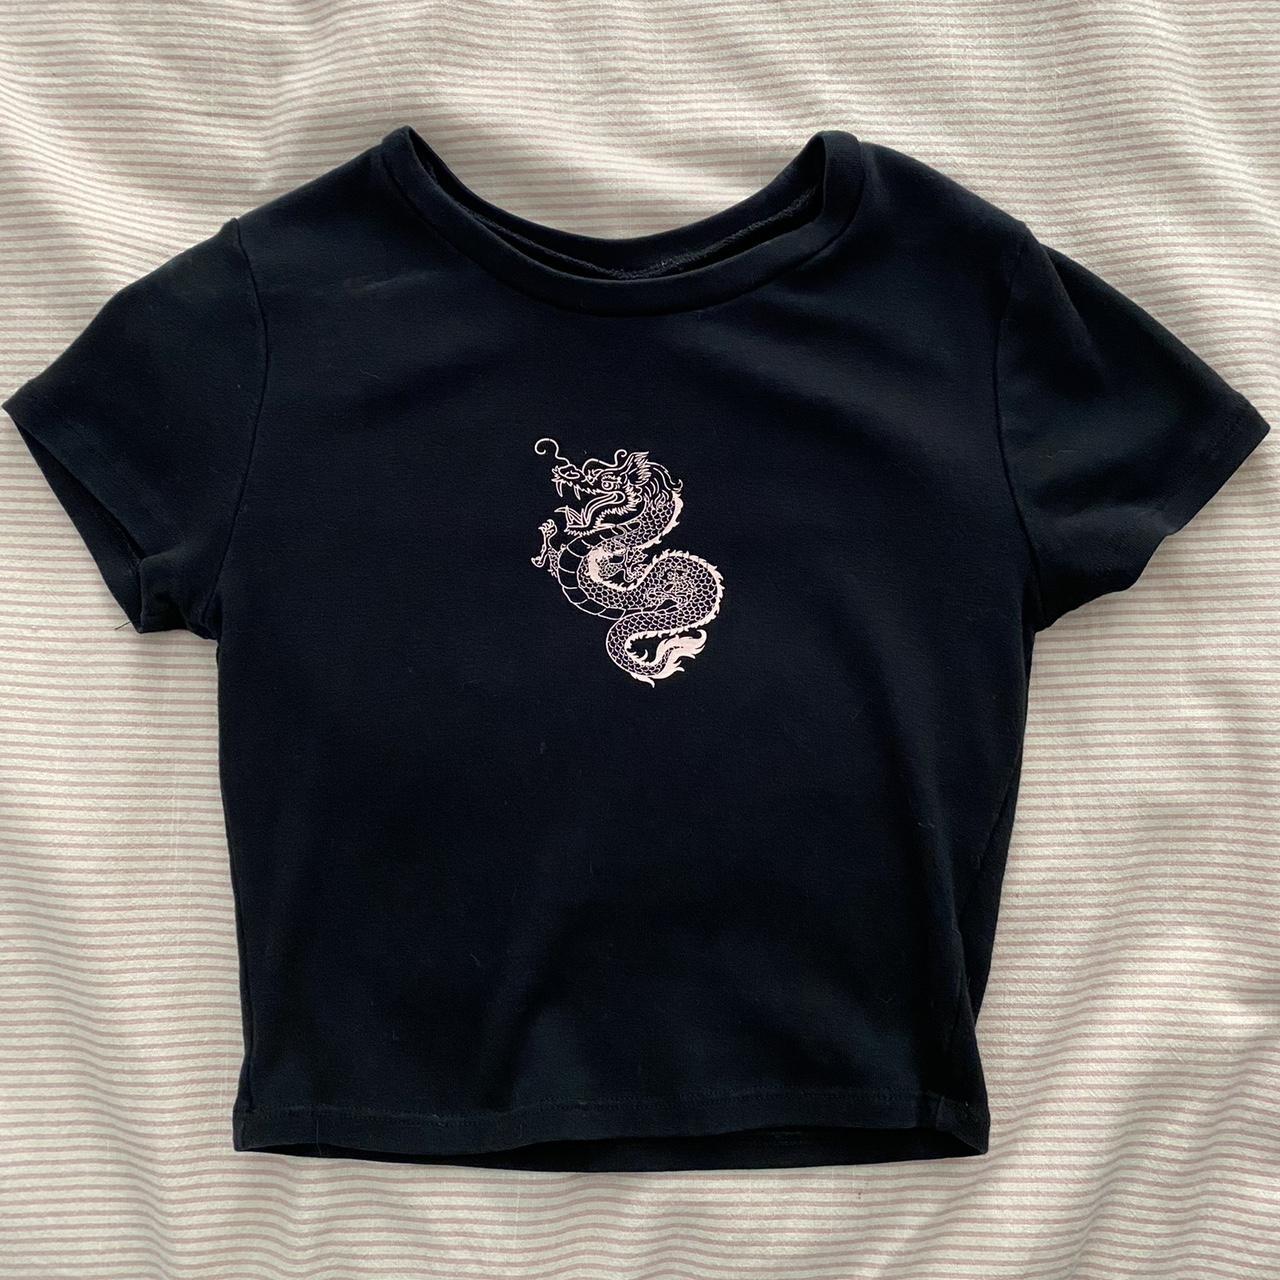 Garage dragon baby tee size XS Some parts of the... - Depop